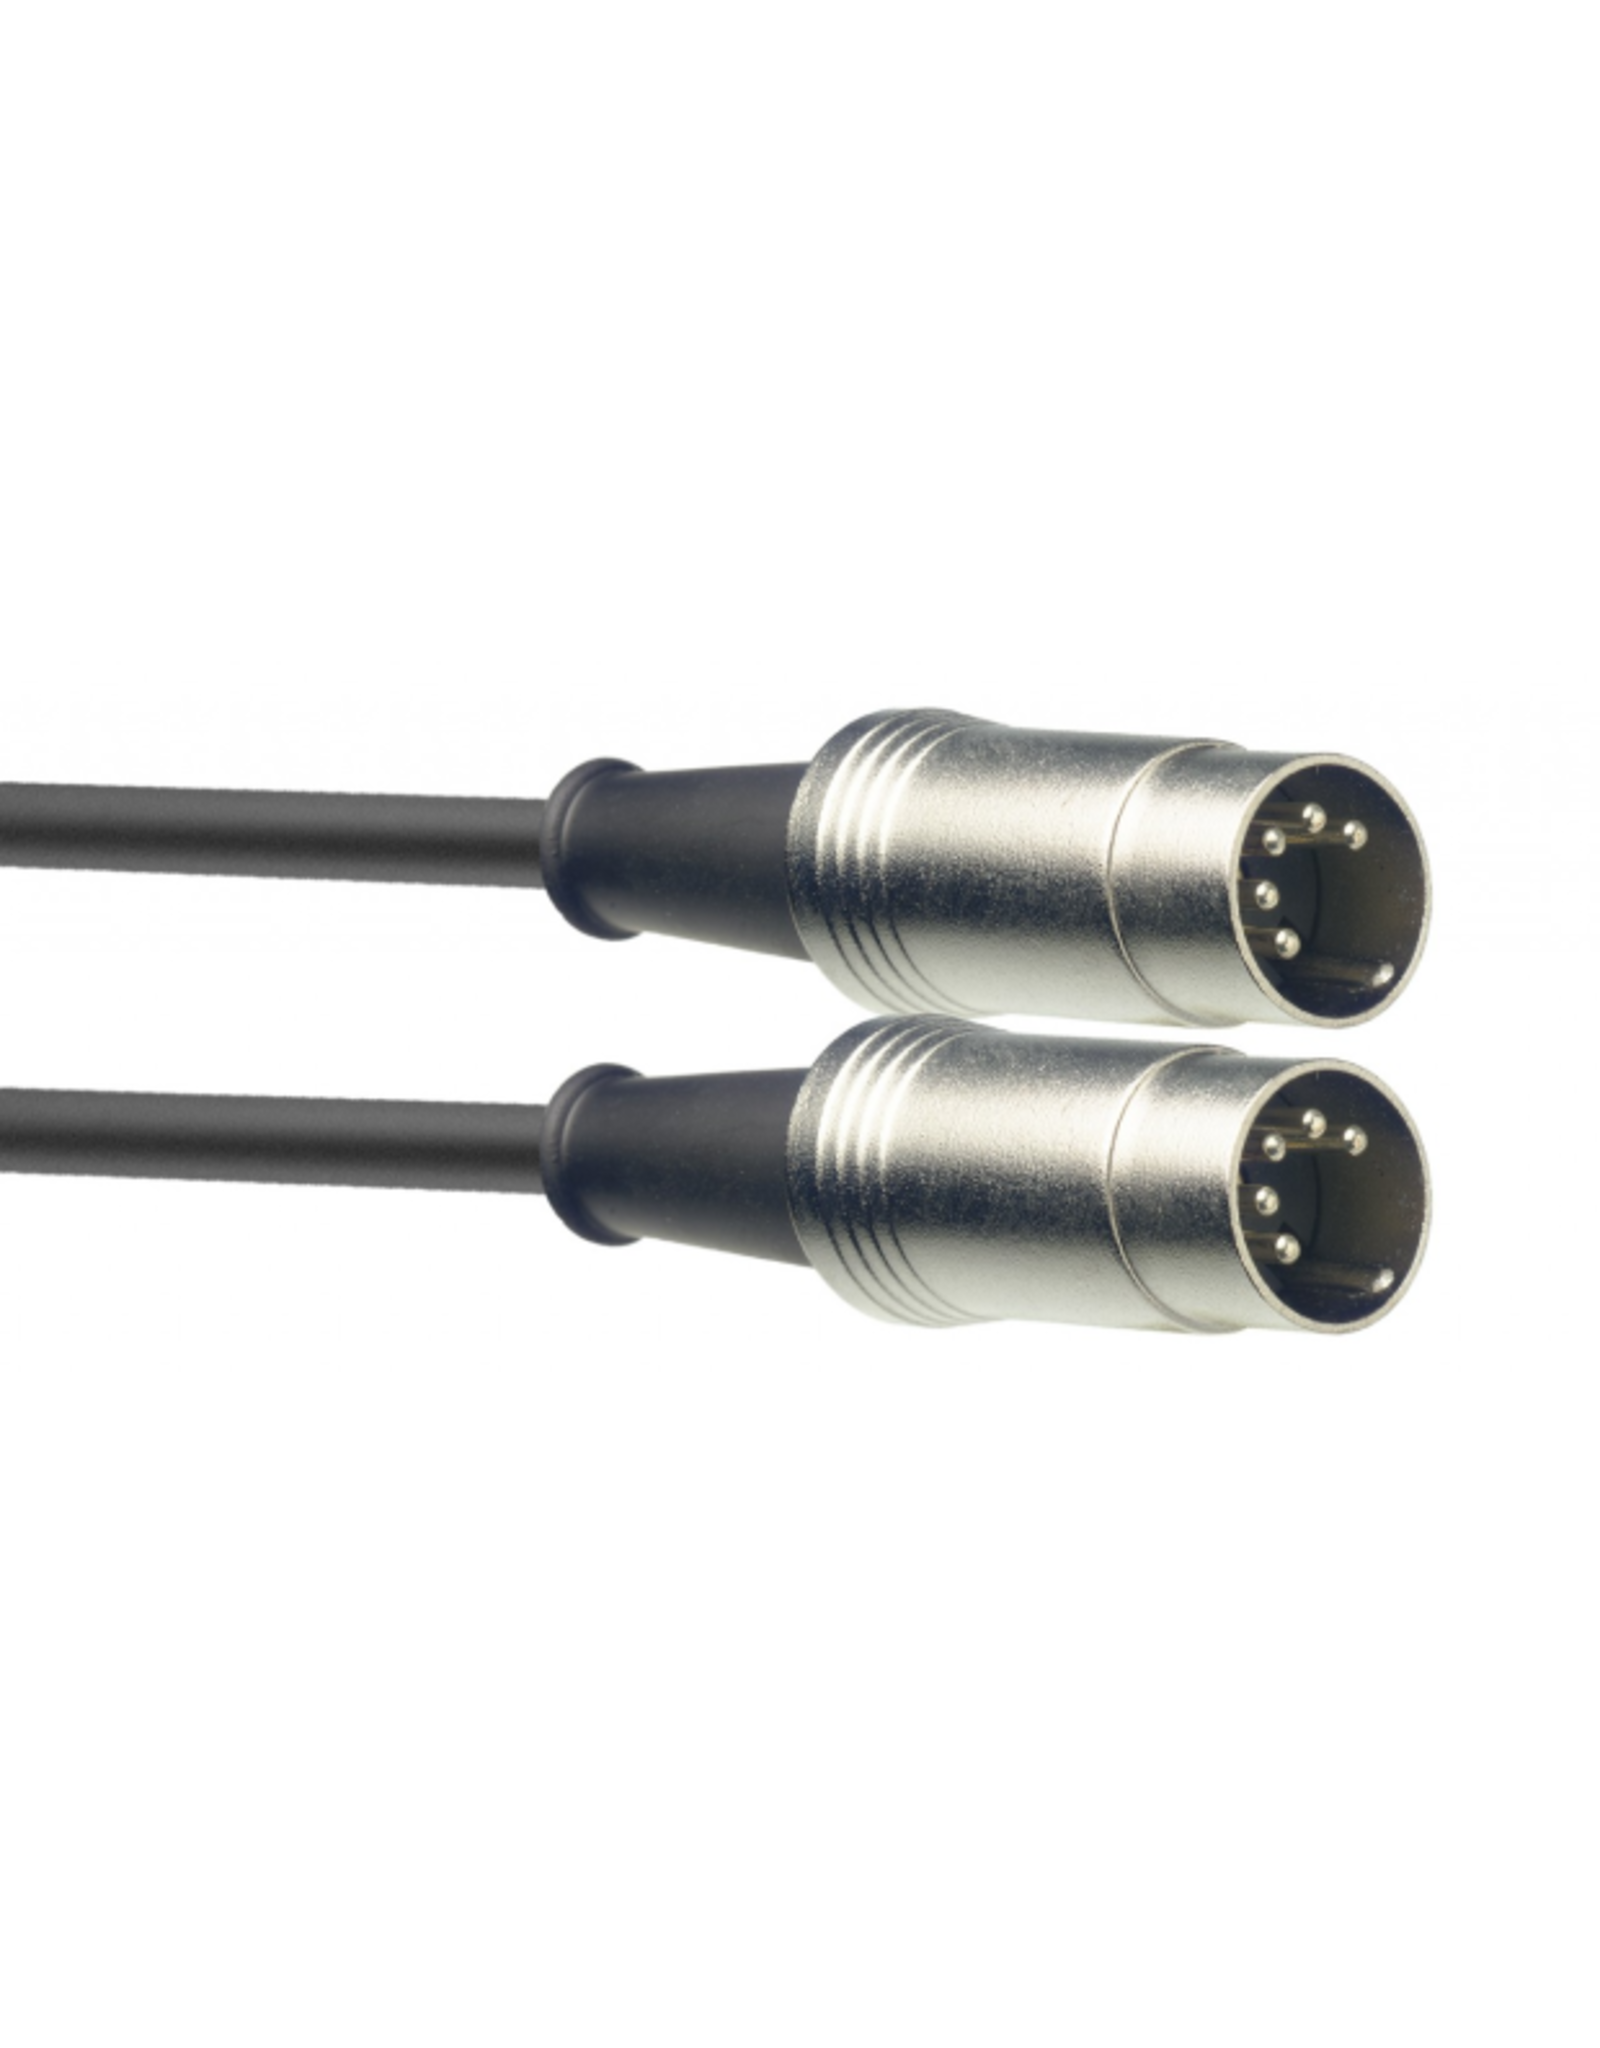 Stagg Stagg MIDI Cable, DIN/DIN (m/m), 3', Metal Connectors